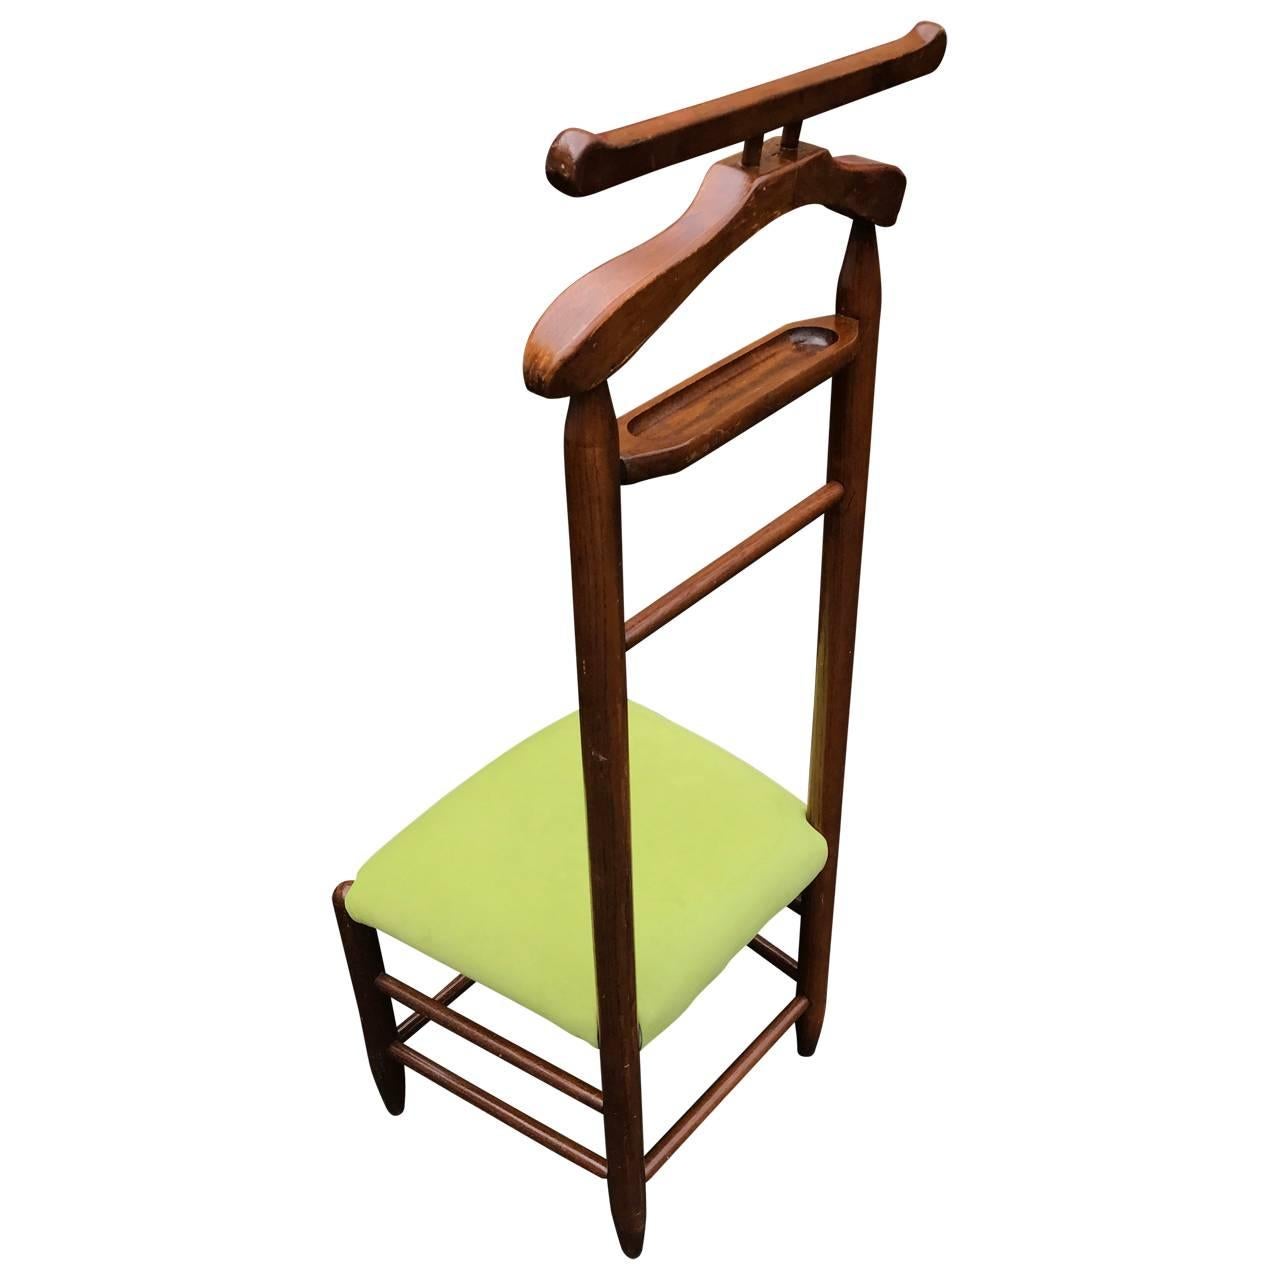 Italian wooden valet chair with green faux suede fabric seat, Mid-Century Modern.
Newly upholstered vintage valet chair in lime green faux suede fabric. This valet chair is a classic part of a man's dressing room. The new green seat makes this valet